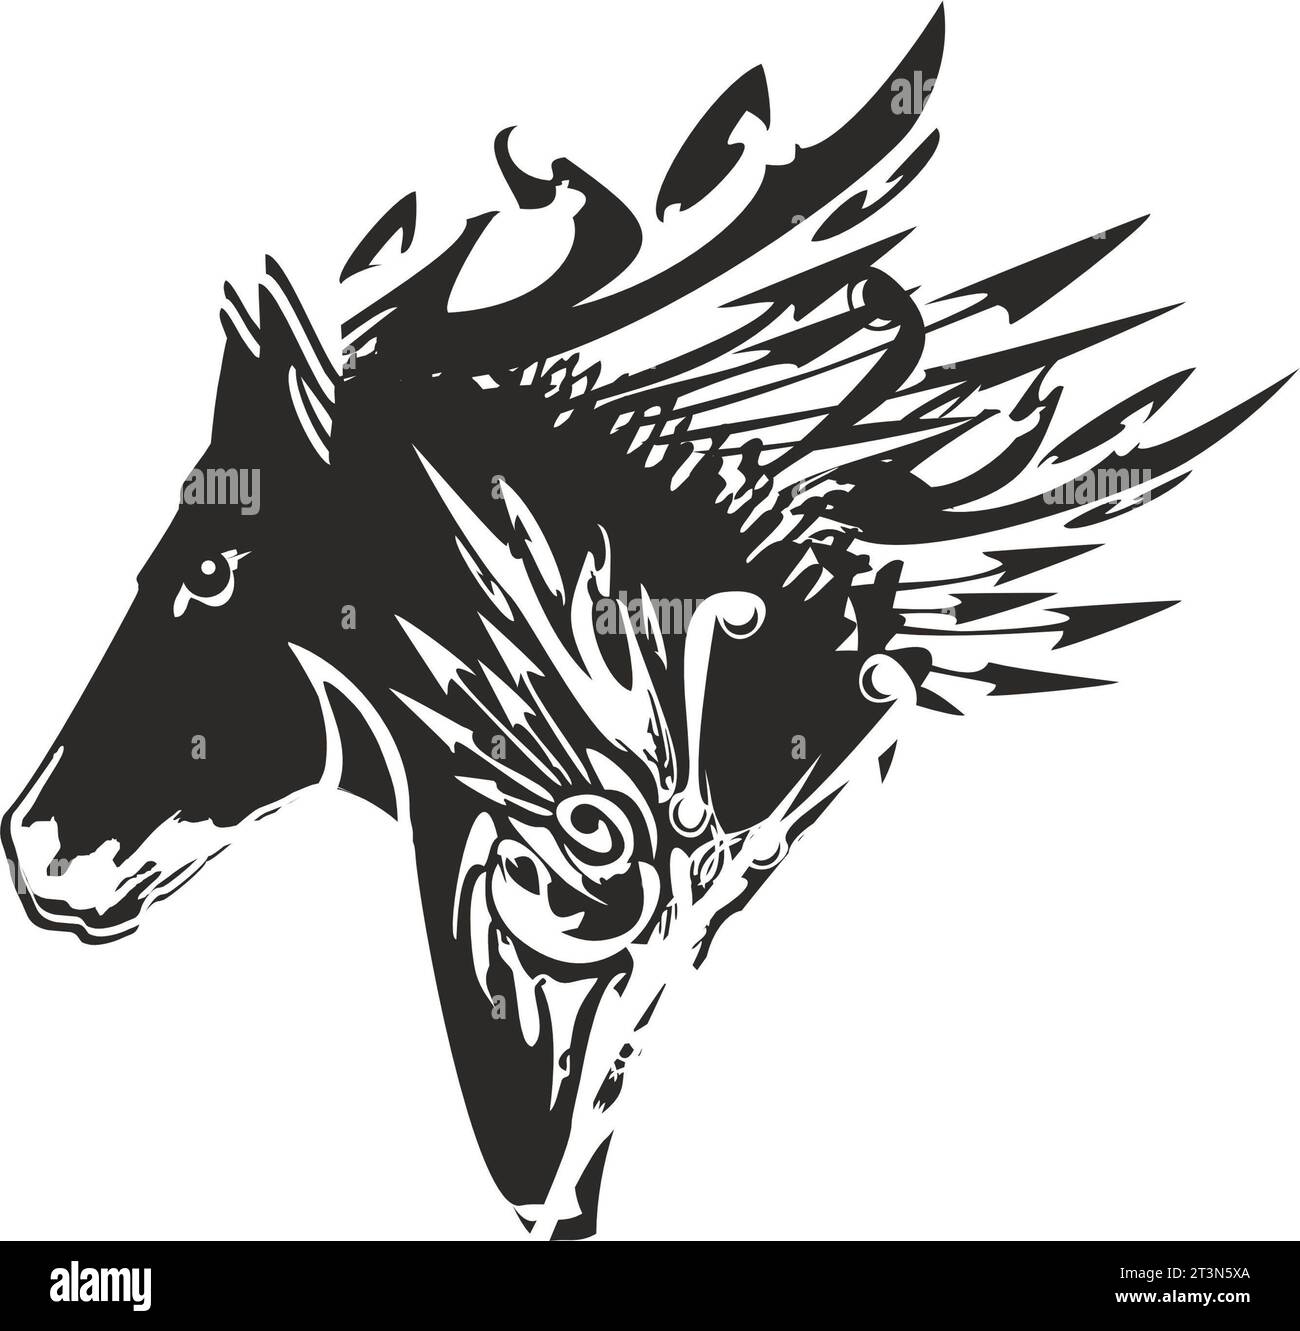 Black-white ornamental horse head for prints on T-shirts or emblems. Horse symbol for business concepts, wallpapers, posters, logos, fashion trends Stock Photo